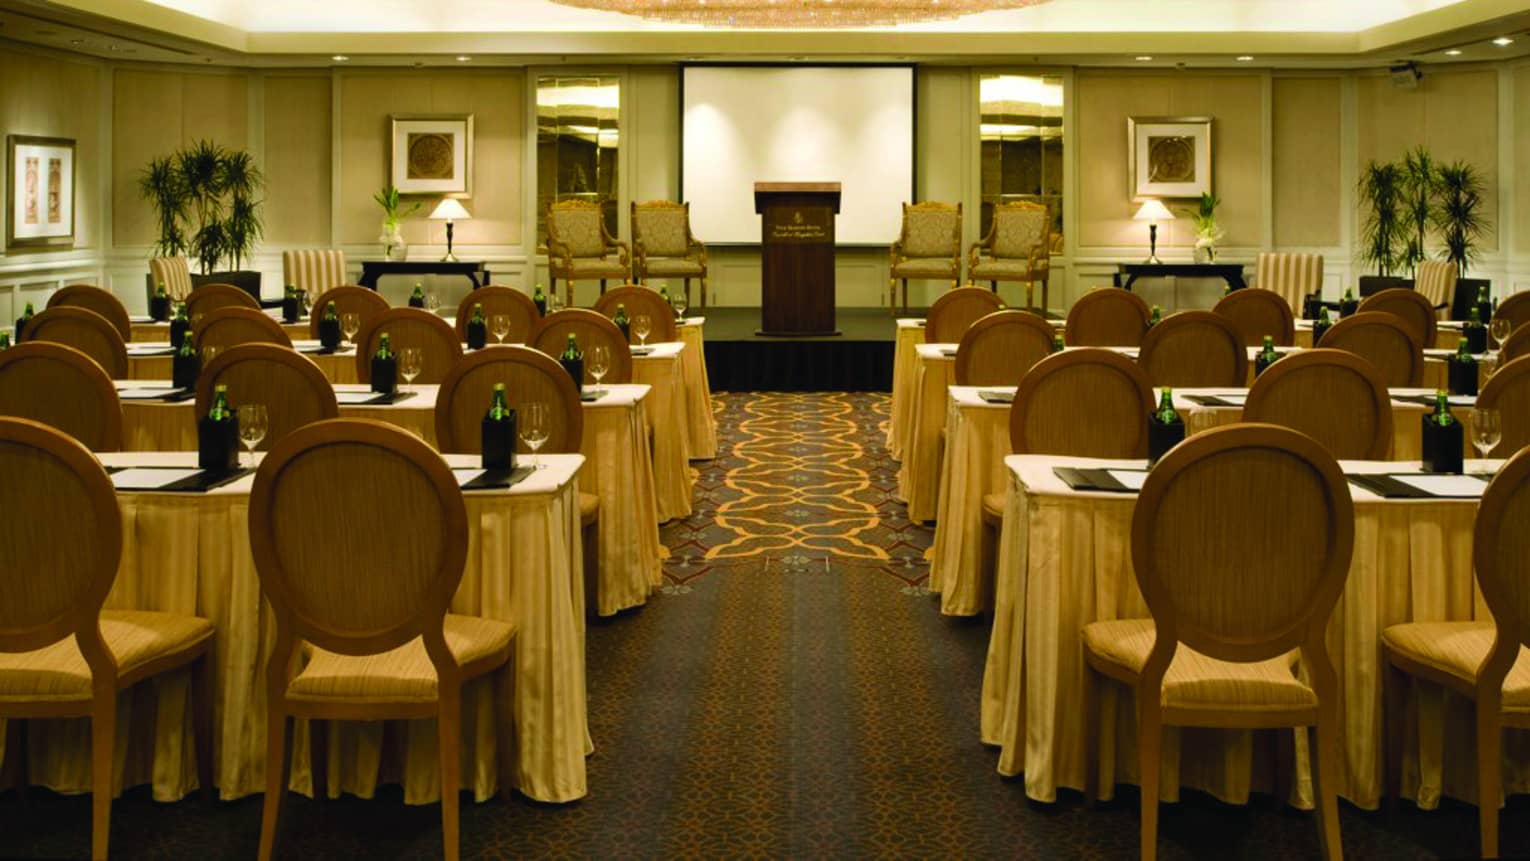 Meeting room with large chandelier, rows of tables with chairs facing podium with four chairs